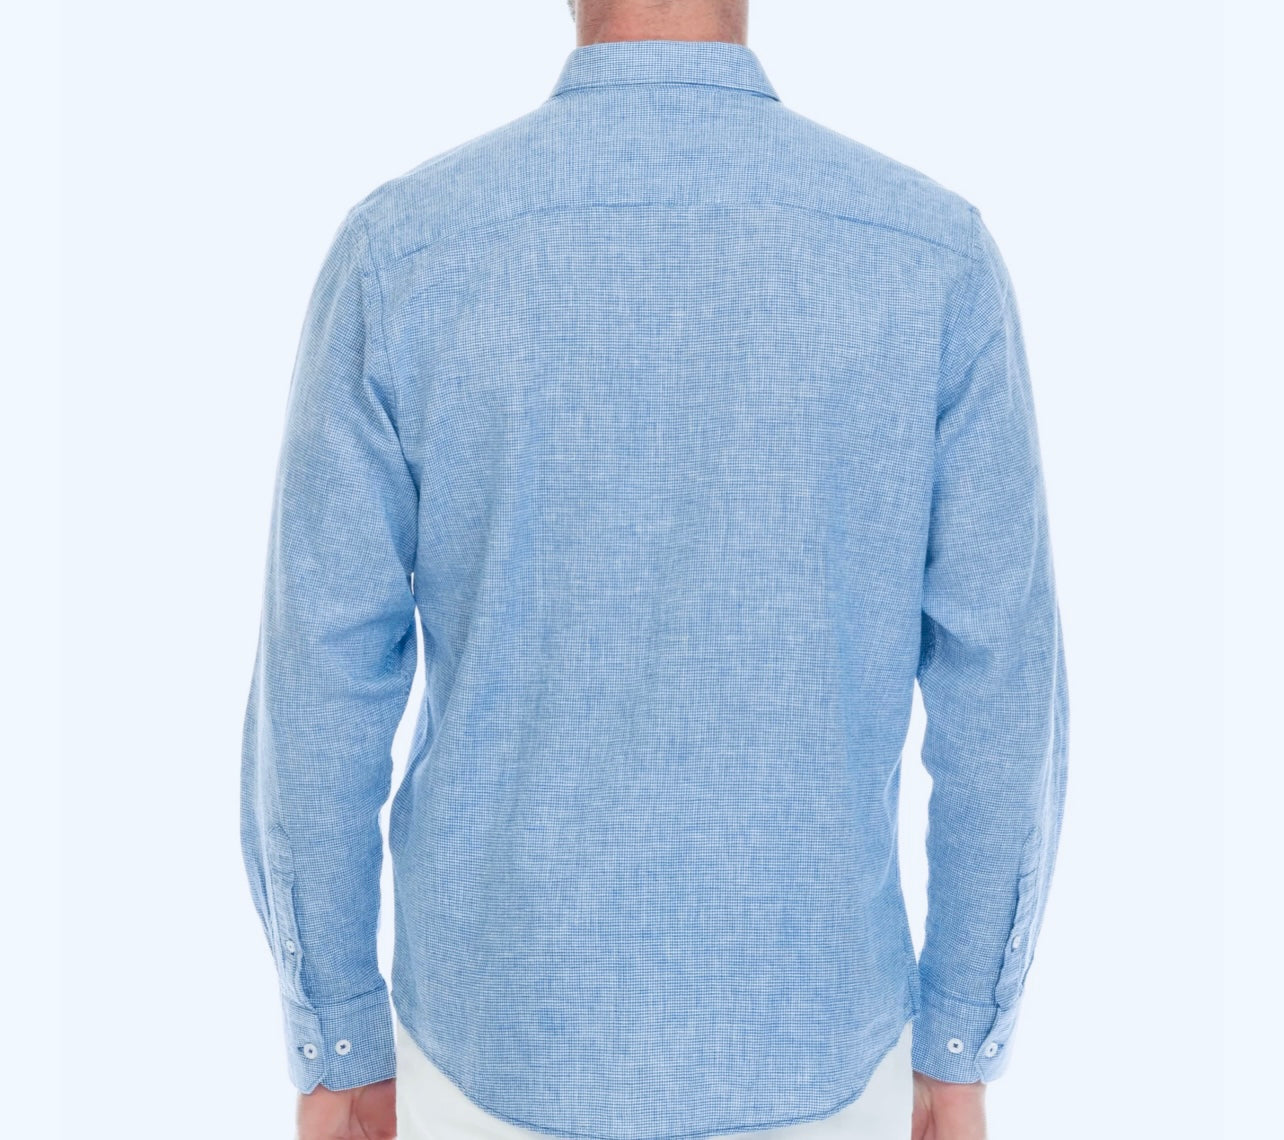 Classic Tropical Linen Panel Shirt, Available in White, Pink, and Blue